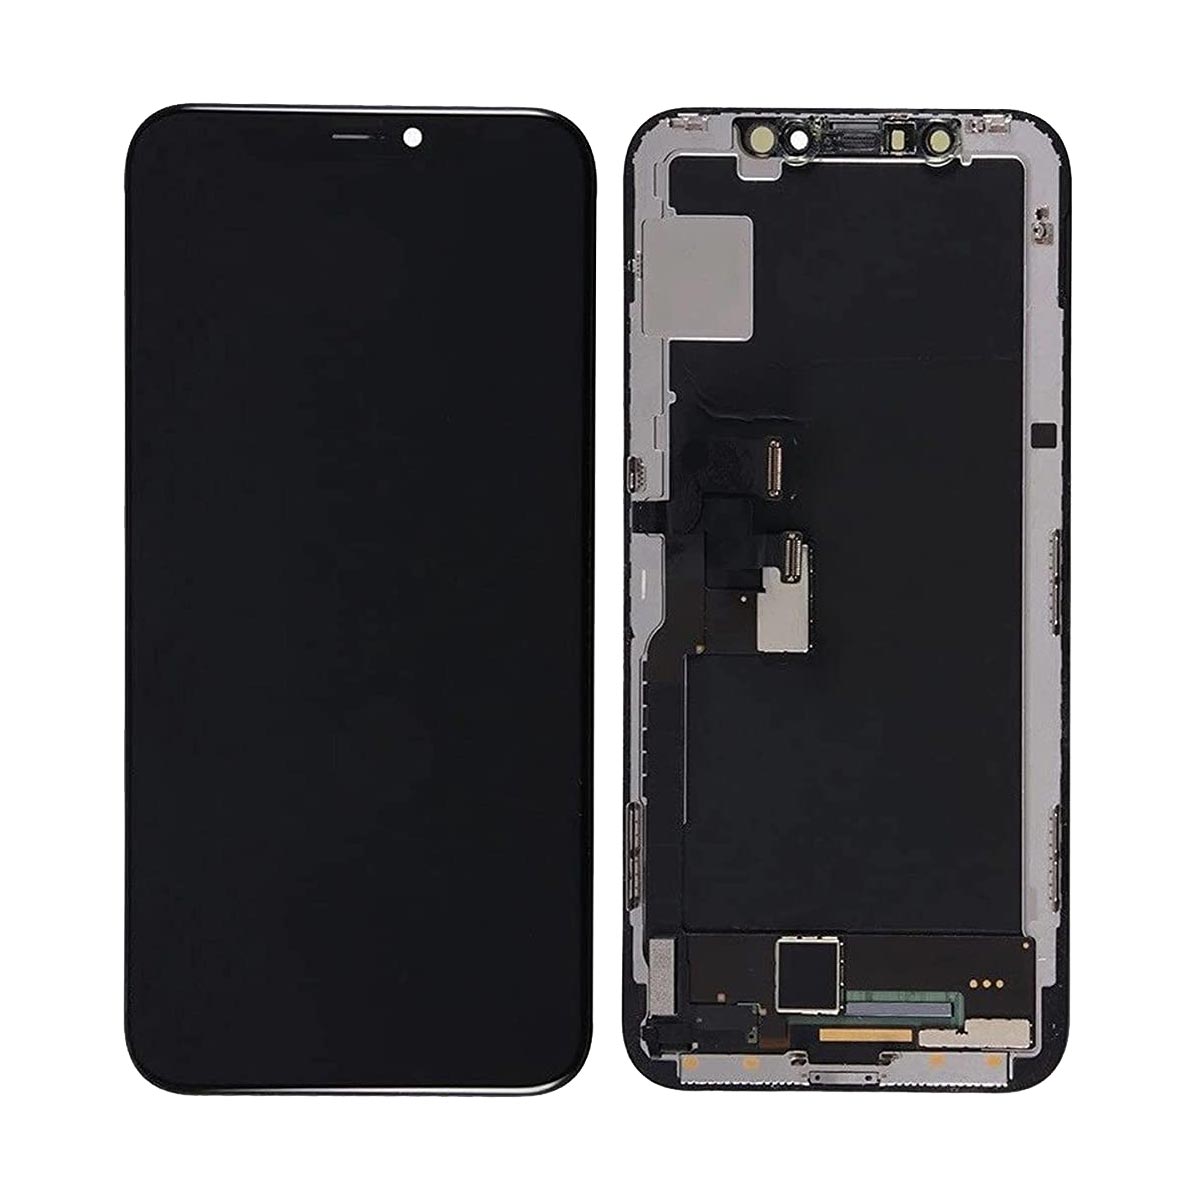 Geardo Premium INCELL LCD Touch Screen Assembly + Frame for iPhone X